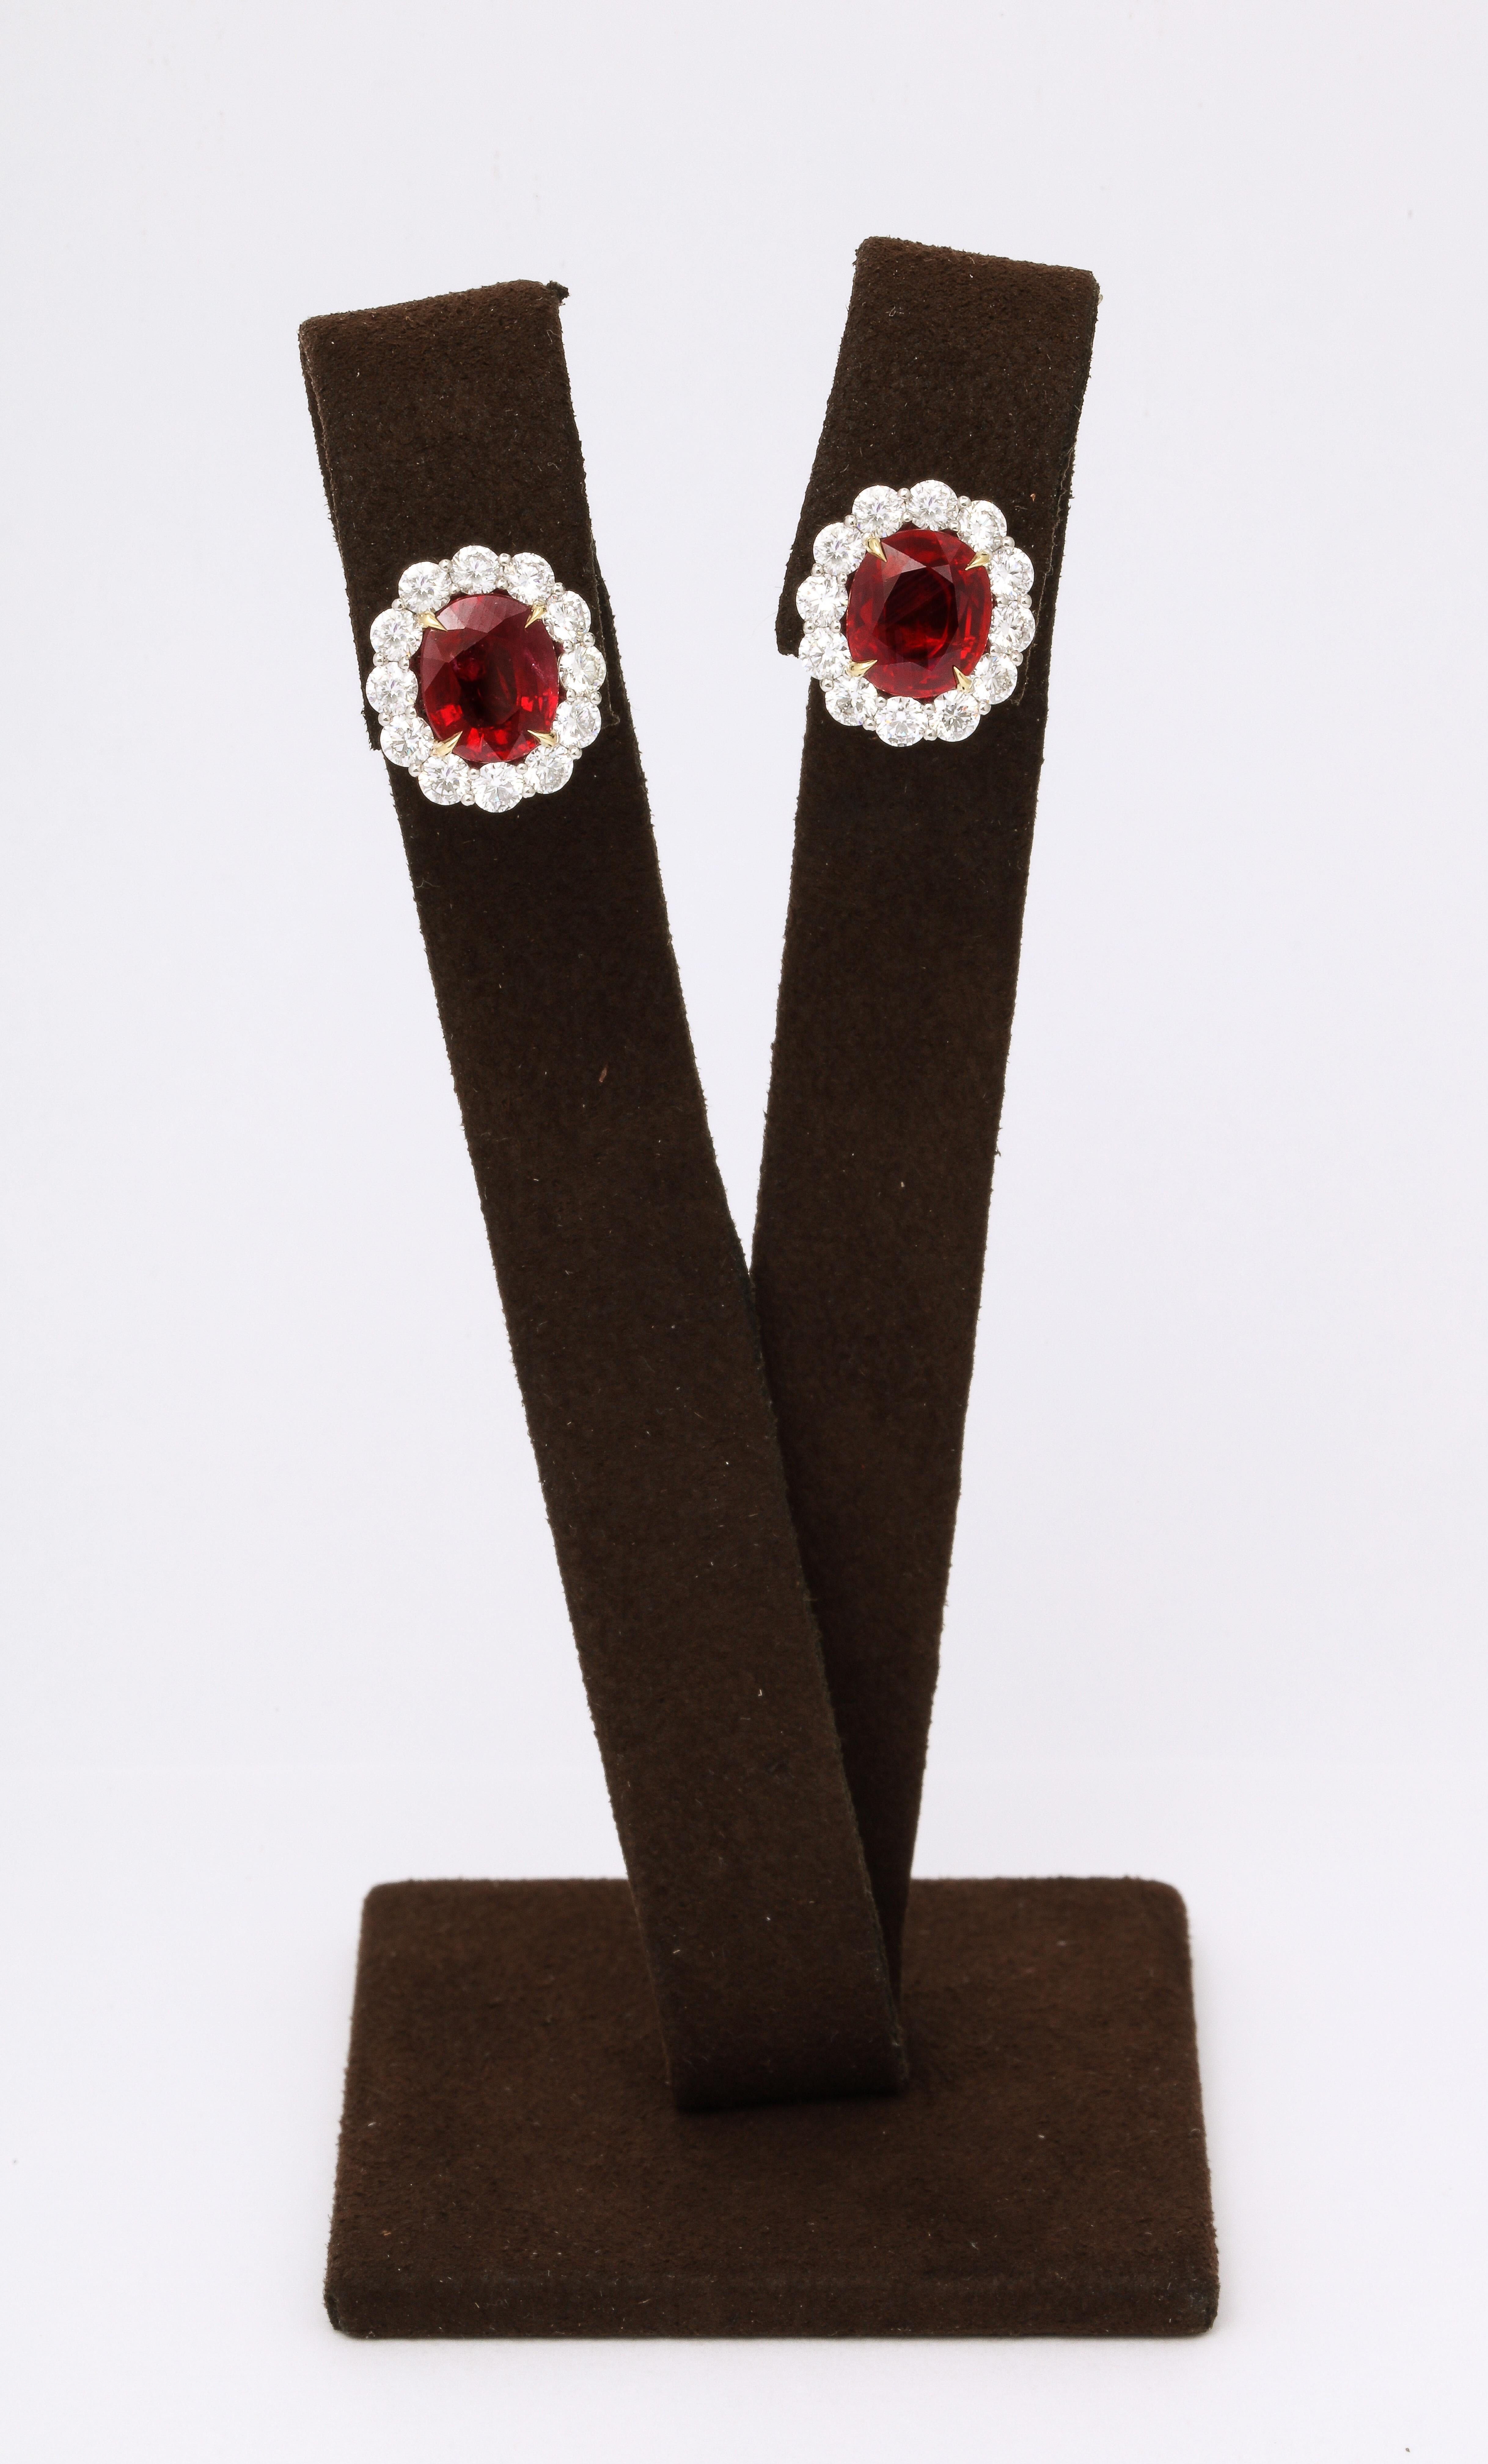 
A pair of timeless high quality Certified “Pigeon blood” rubies. 

6.25 carats of Vivid Red oval Ruby

2.28 carats of colorless white diamonds 

Set in a custom made 18k white gold mounting. 

Approximate measurements: 14.7 mm x 13.2mm 